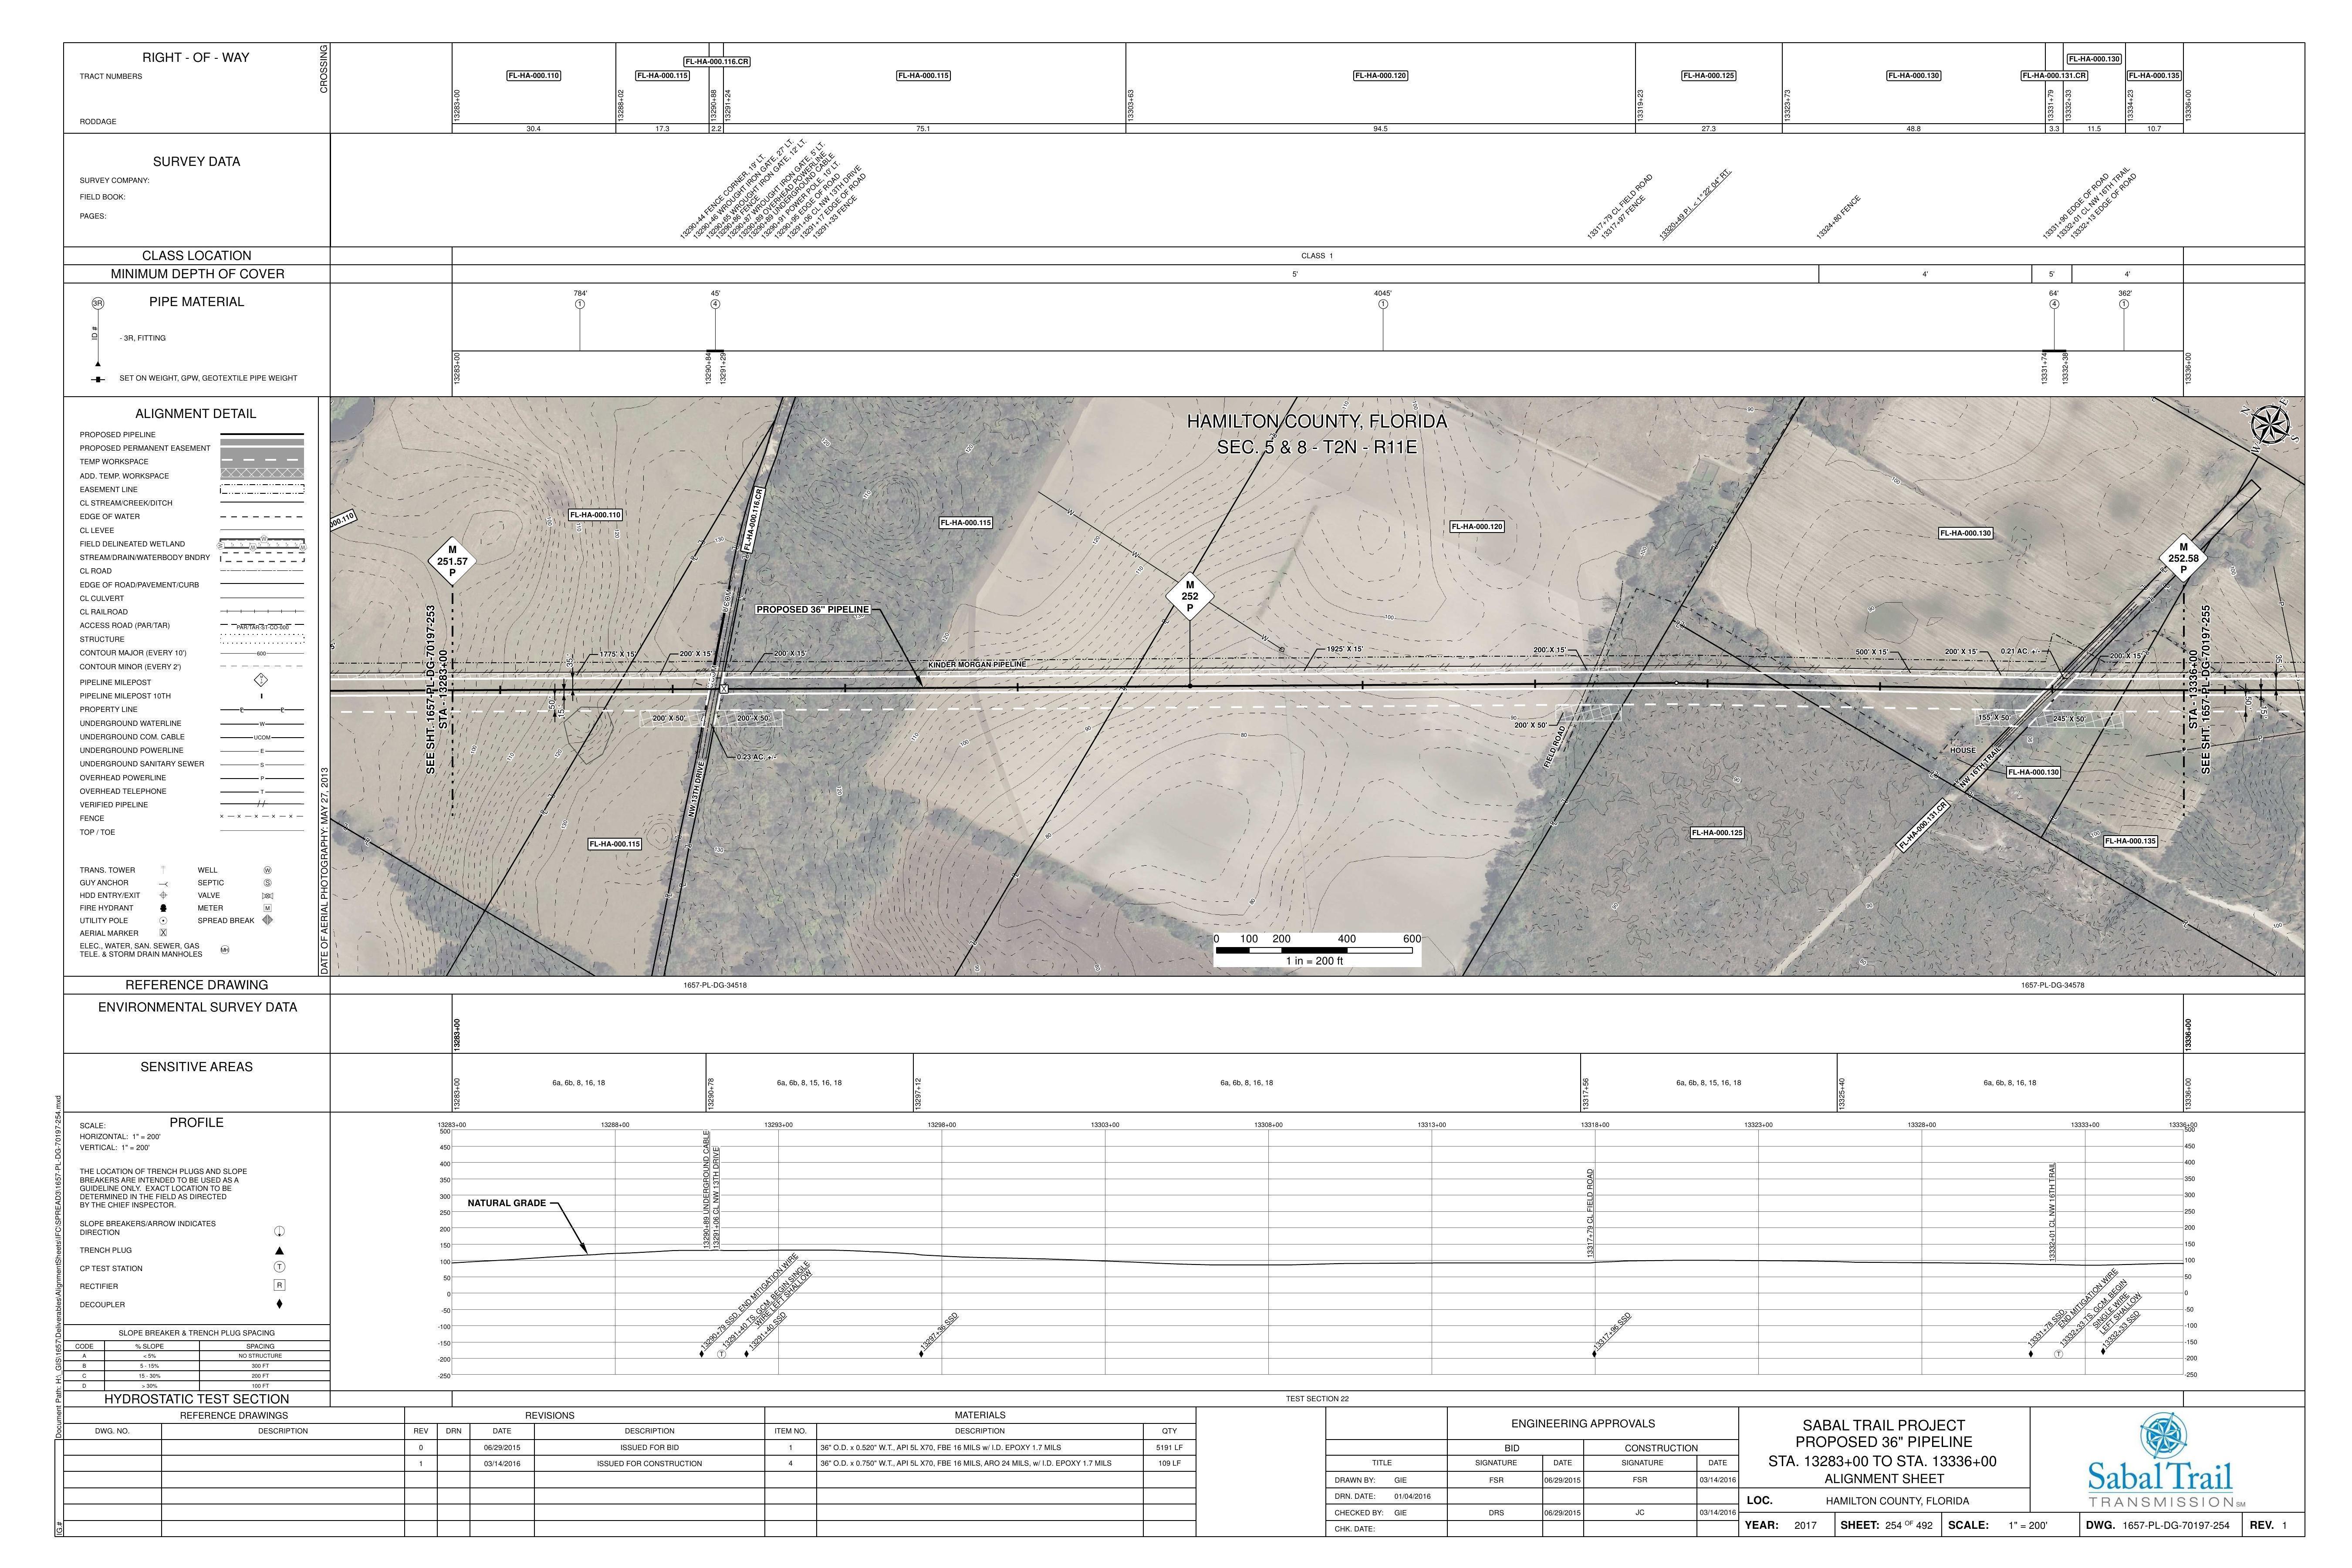 1657-PL-DG-70197-254, STA. 13283+00 TO STA. 13336+00, MP 252.58, KINDER MORGAN PIPELINE, NW 13th Drive, NW 16th Trail, HAMILTON COUNTY, FLORIDA, 30.599025, -83.242411